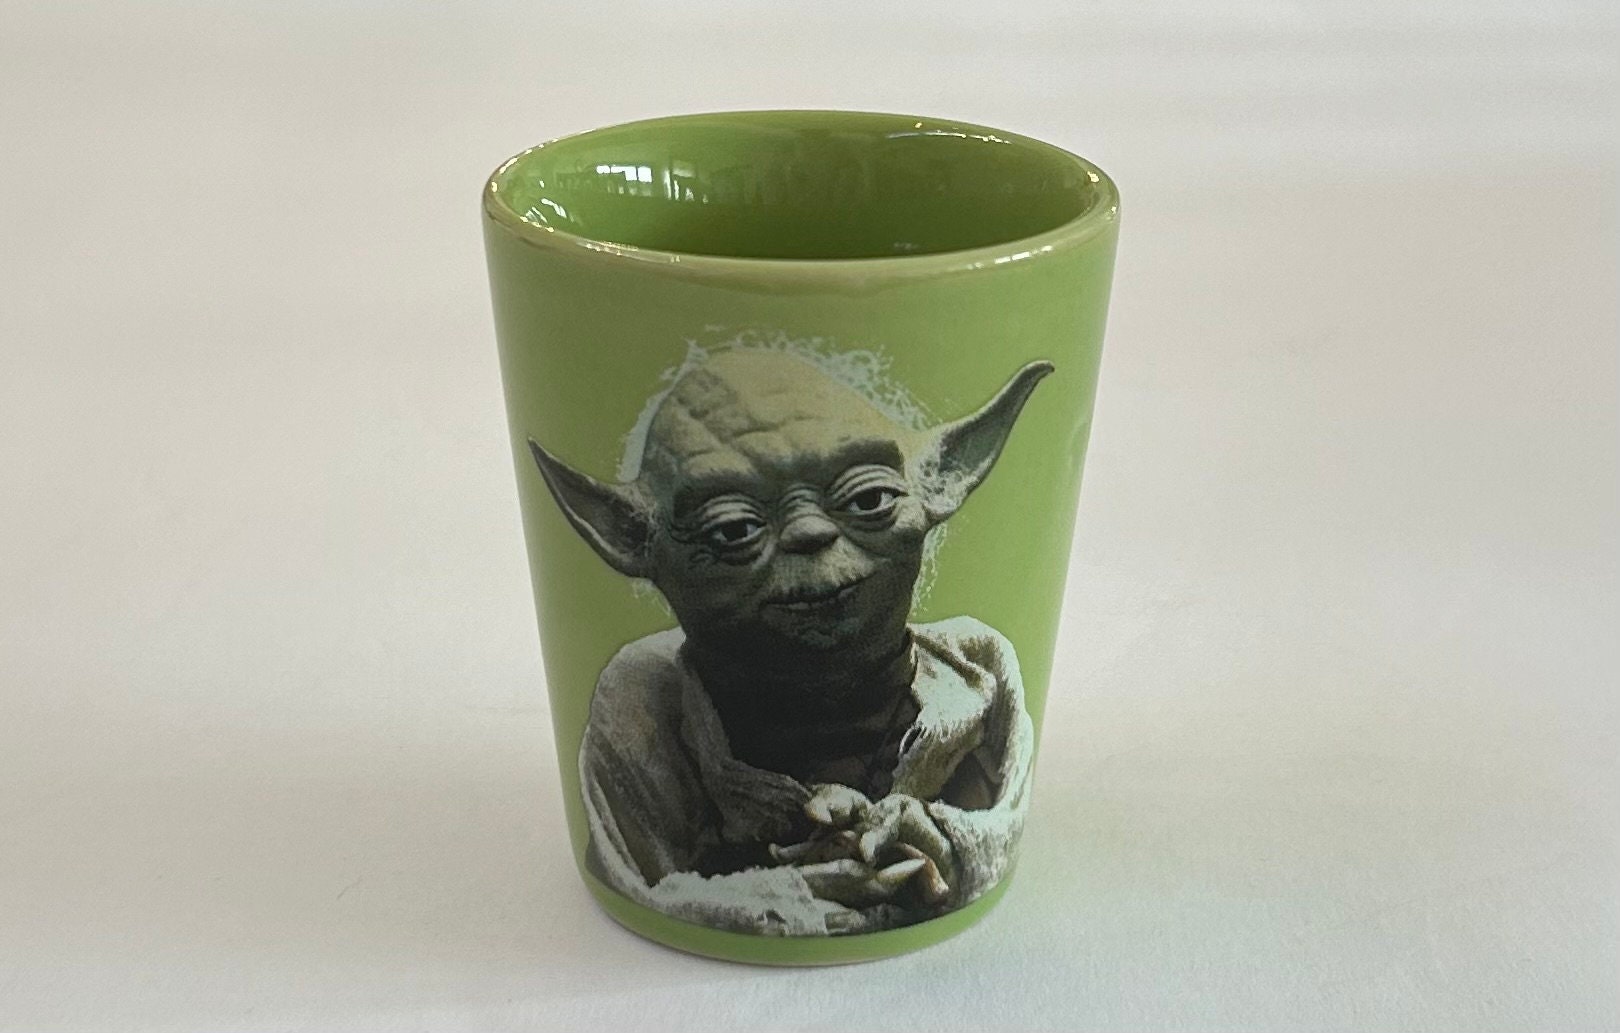 Star Wars Yoda May The Force Be With You Ceramic Shot Glass